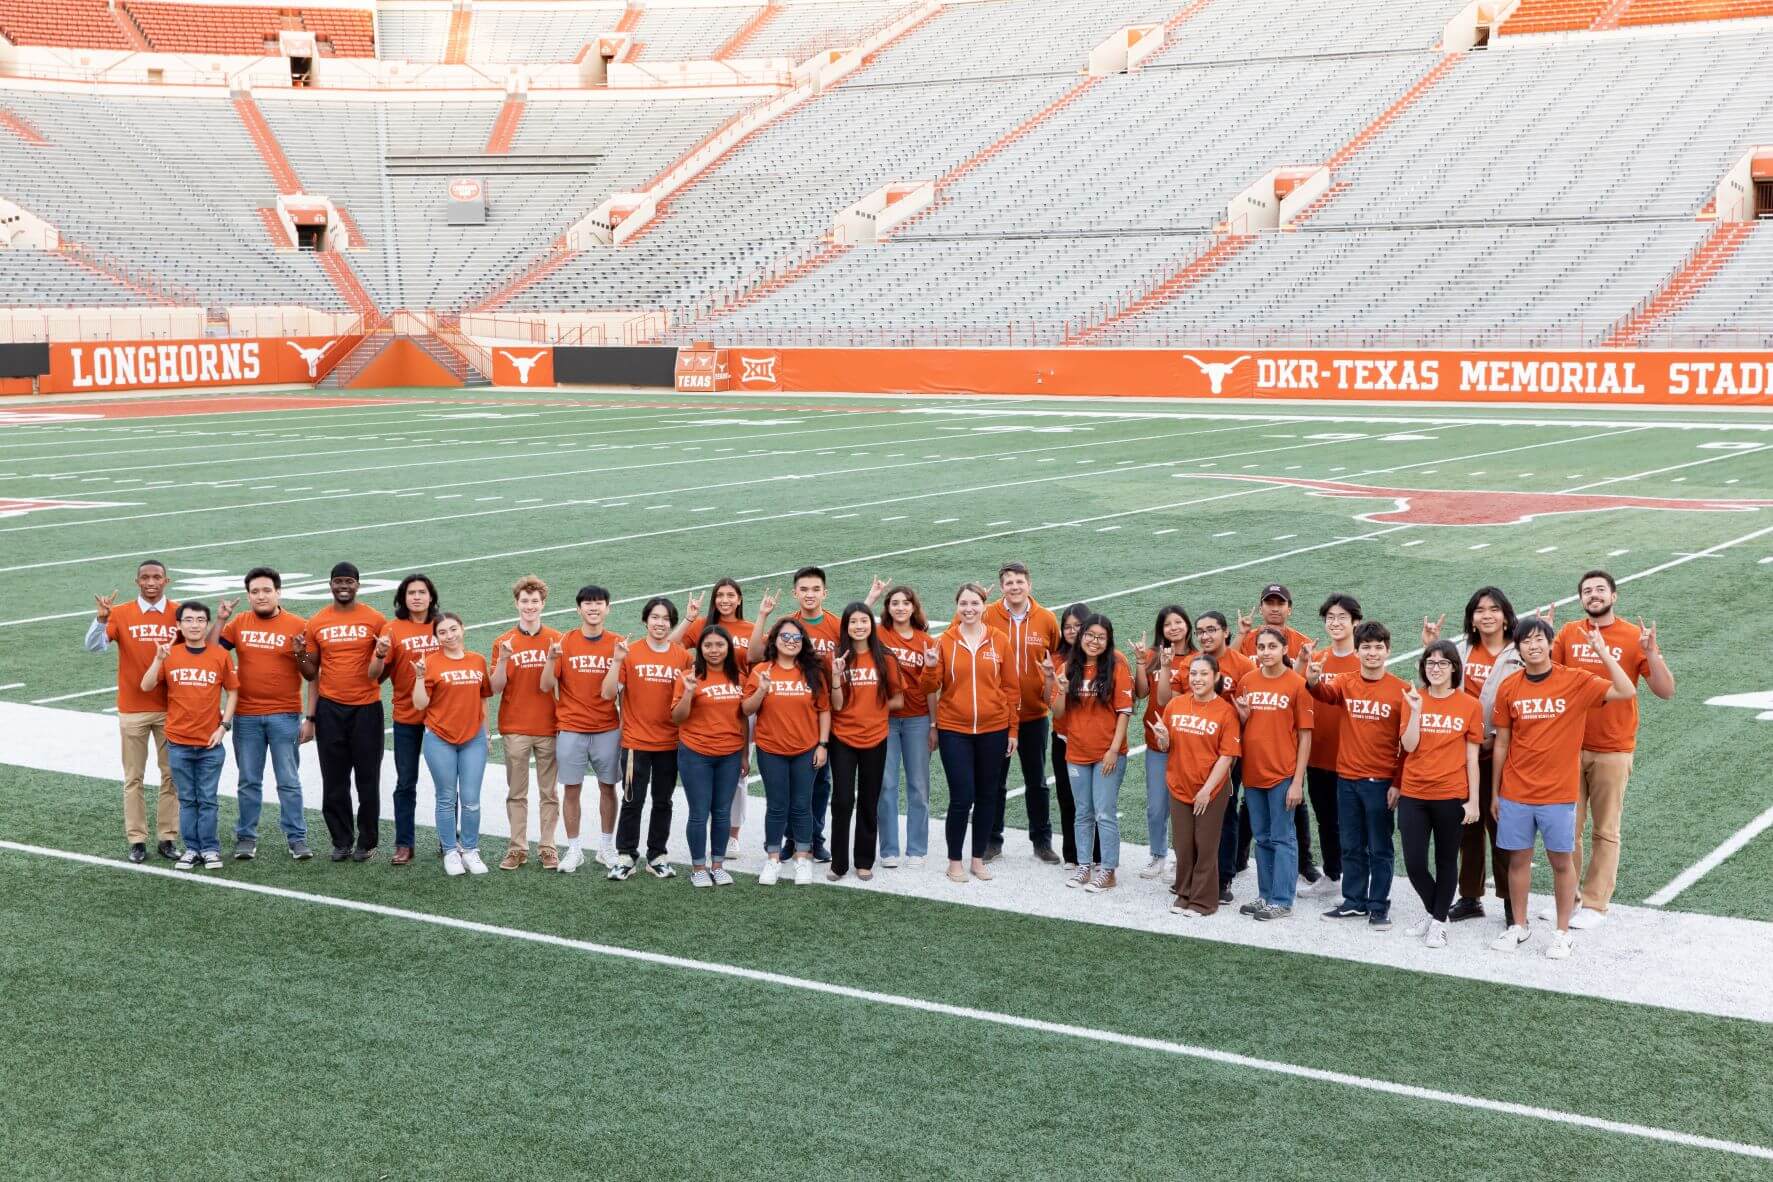 Group of UT Austin Tx engineering students standing in the football field wearing UT Austin t-shirts